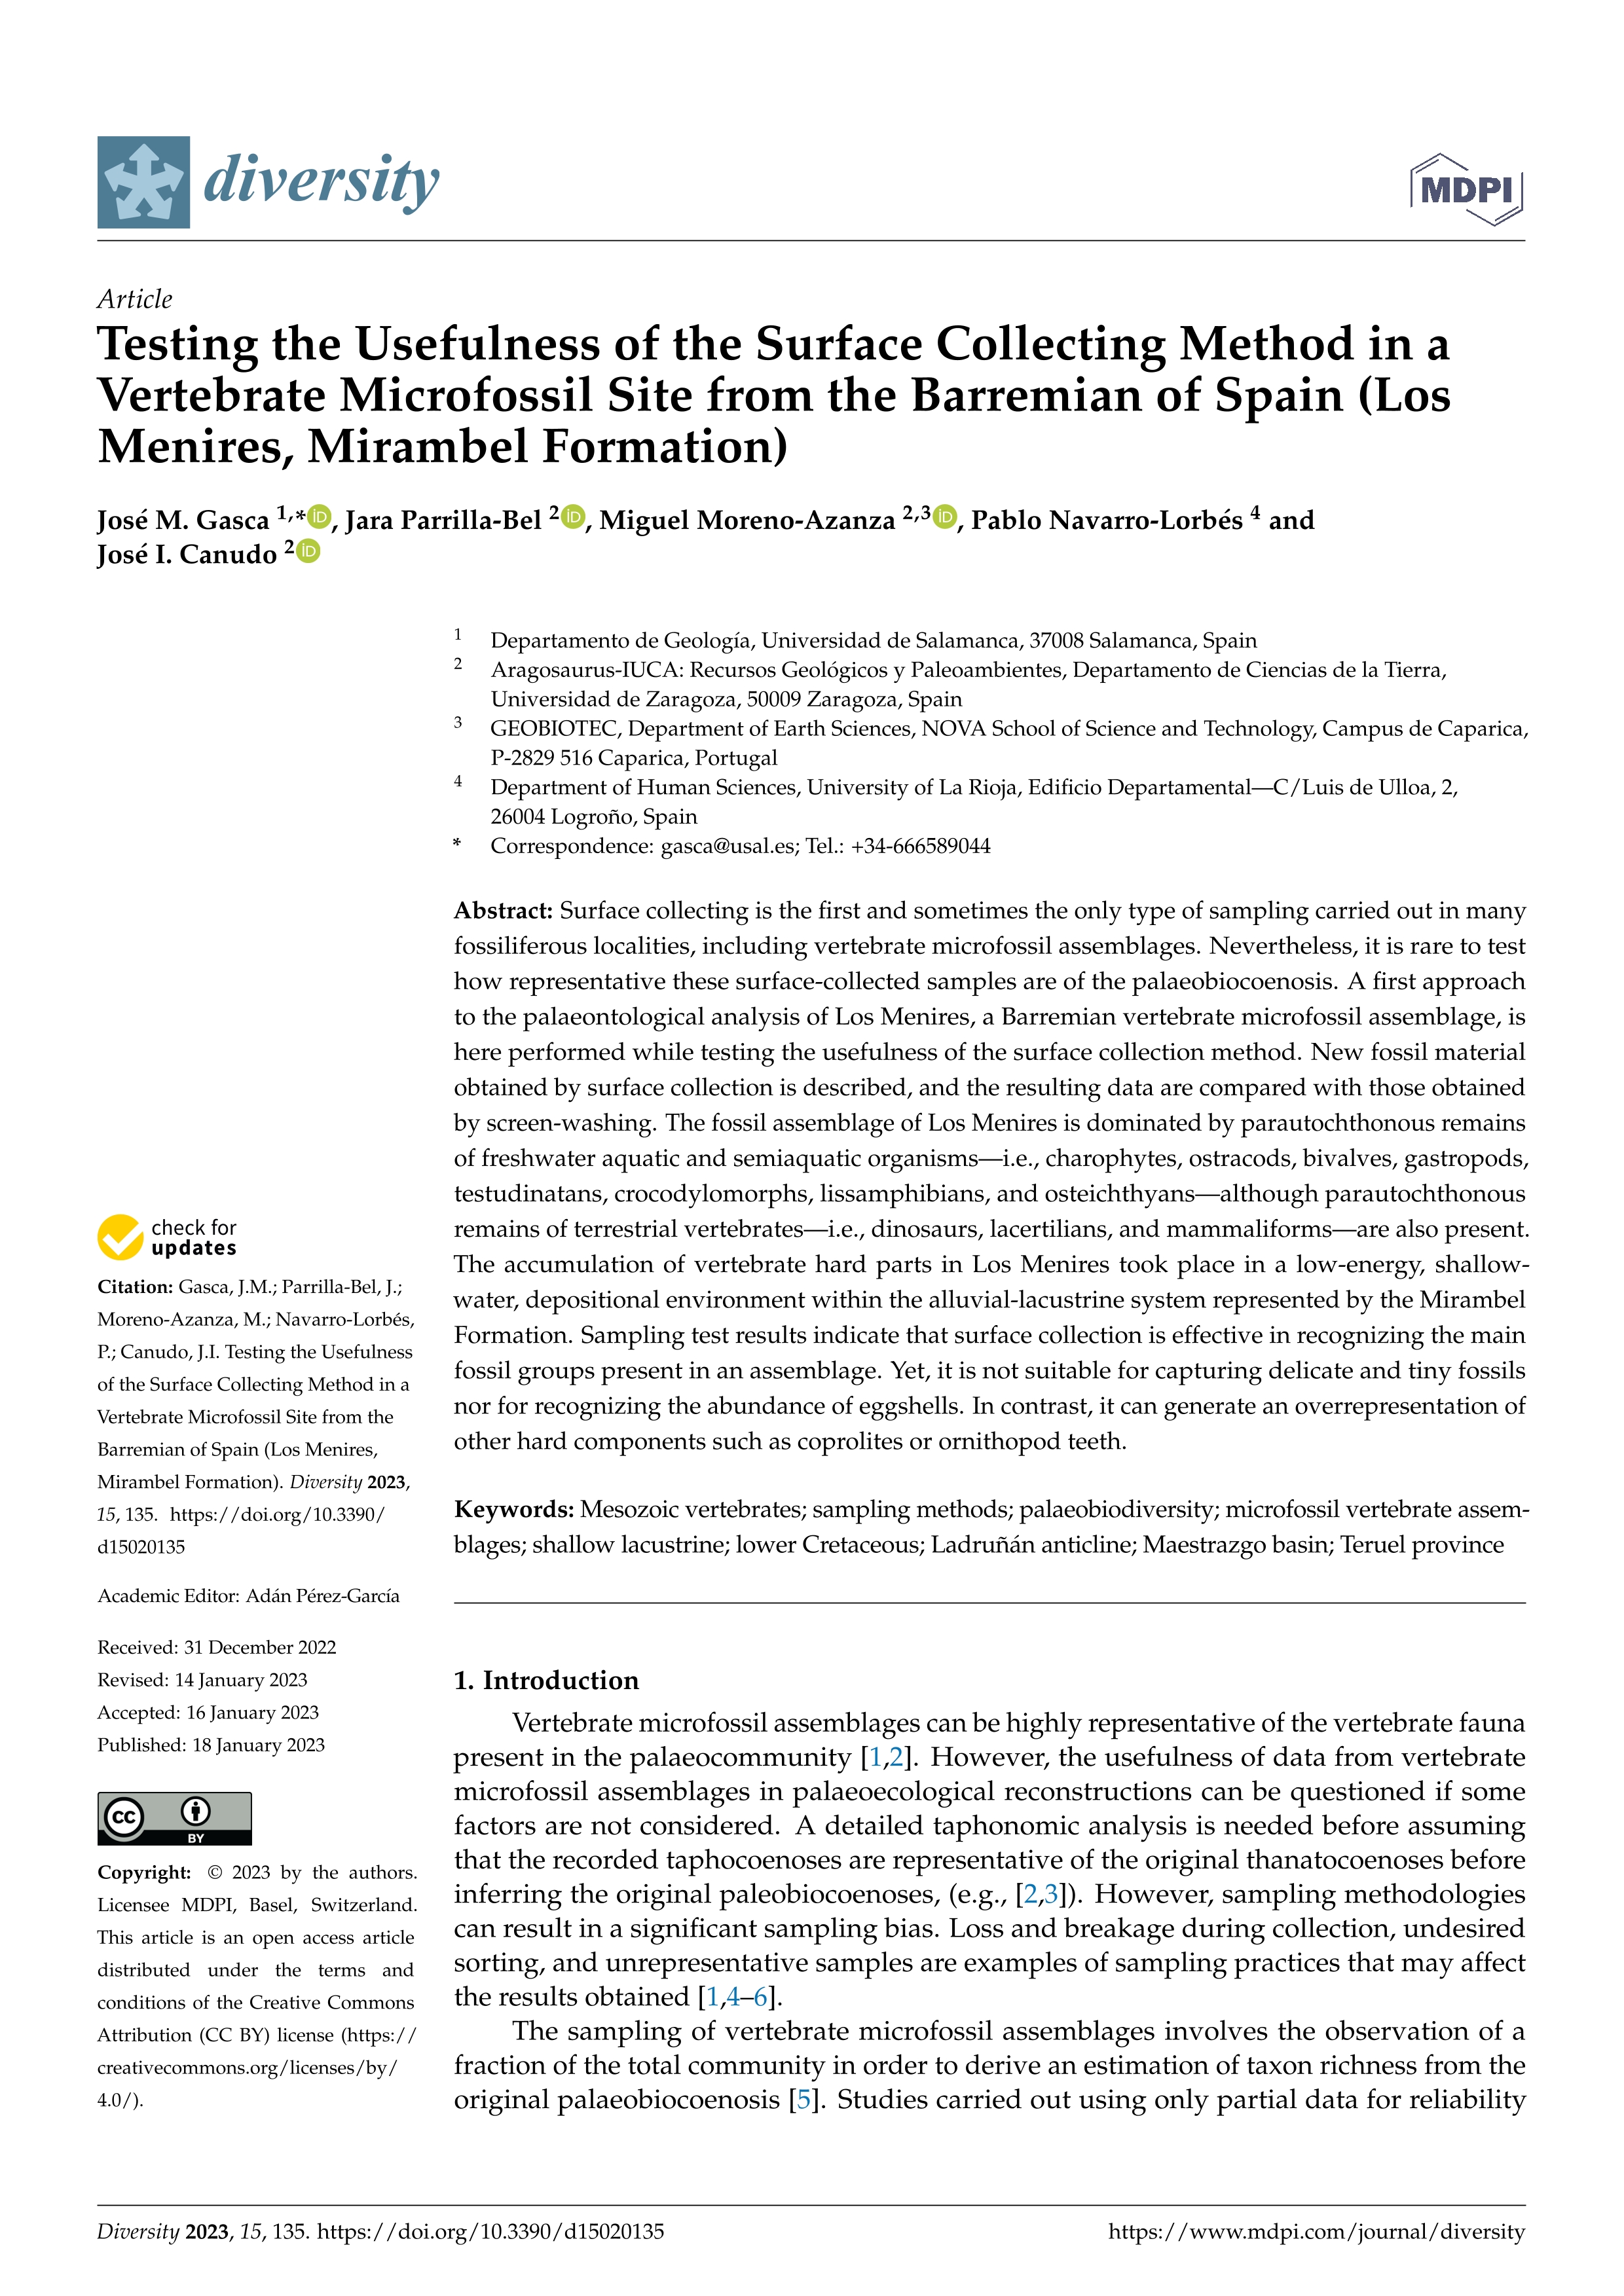 Testing the usefulness of the surface collecting method in a vertebrate microfossil site from the barremian of Spain (Los Menires, Mirambel formation)